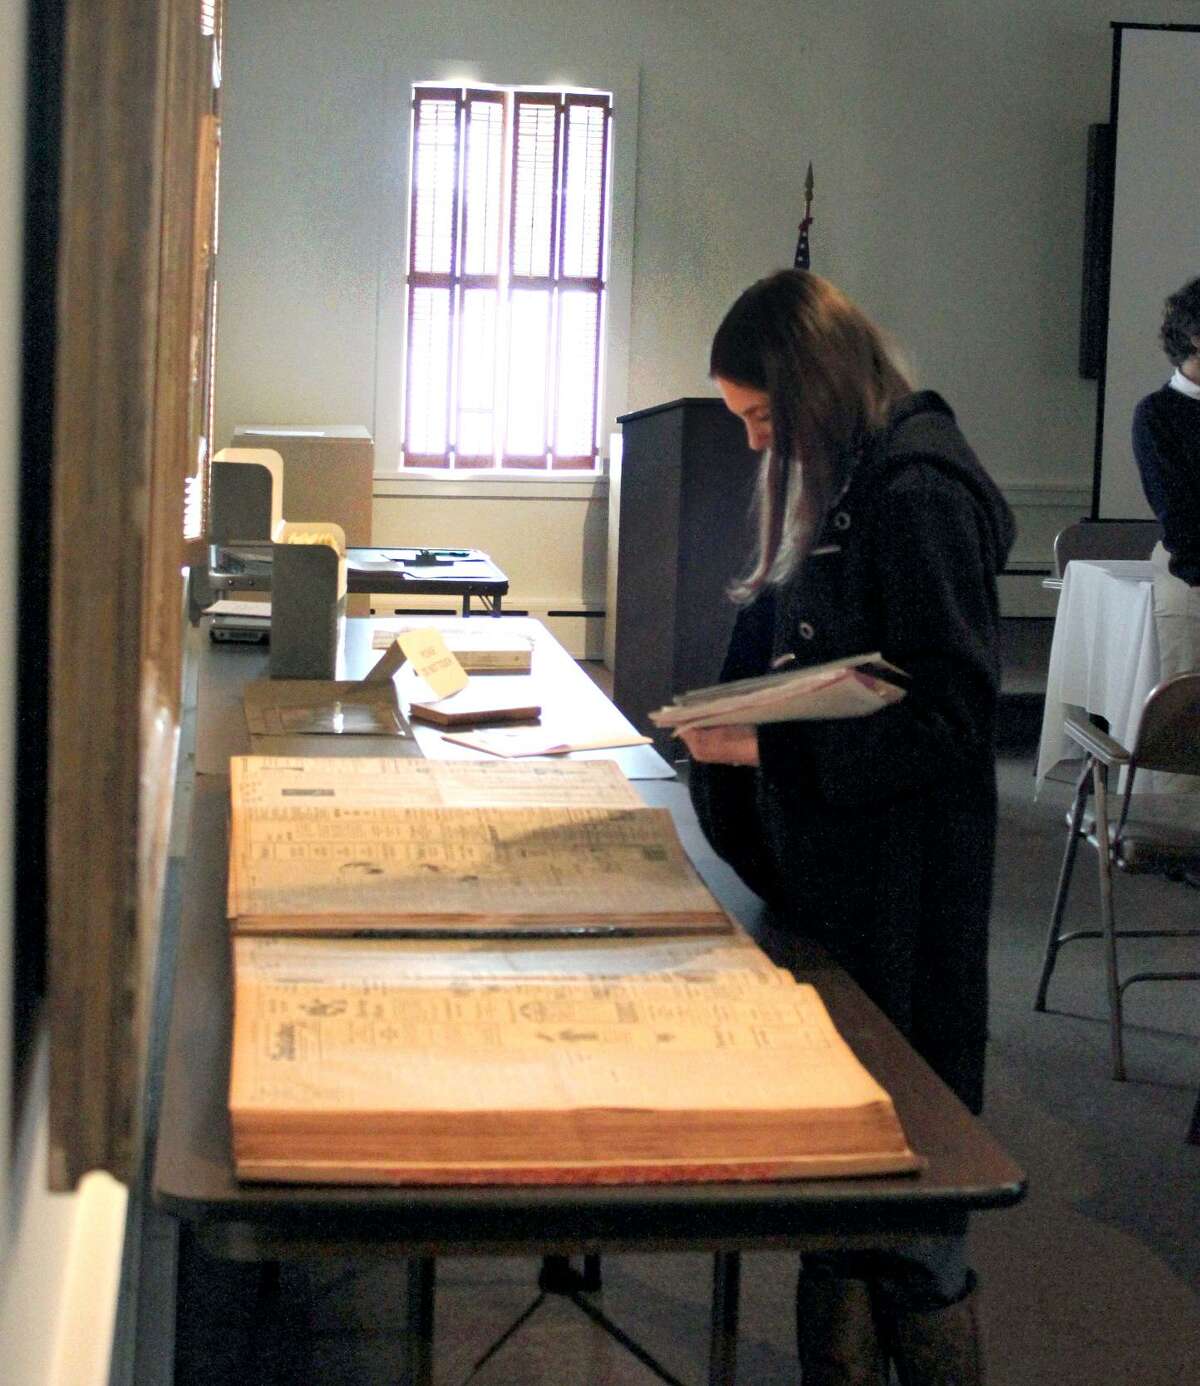 A student visiting the Torrington Historical Society looks over bound copies of vintage newspapers.